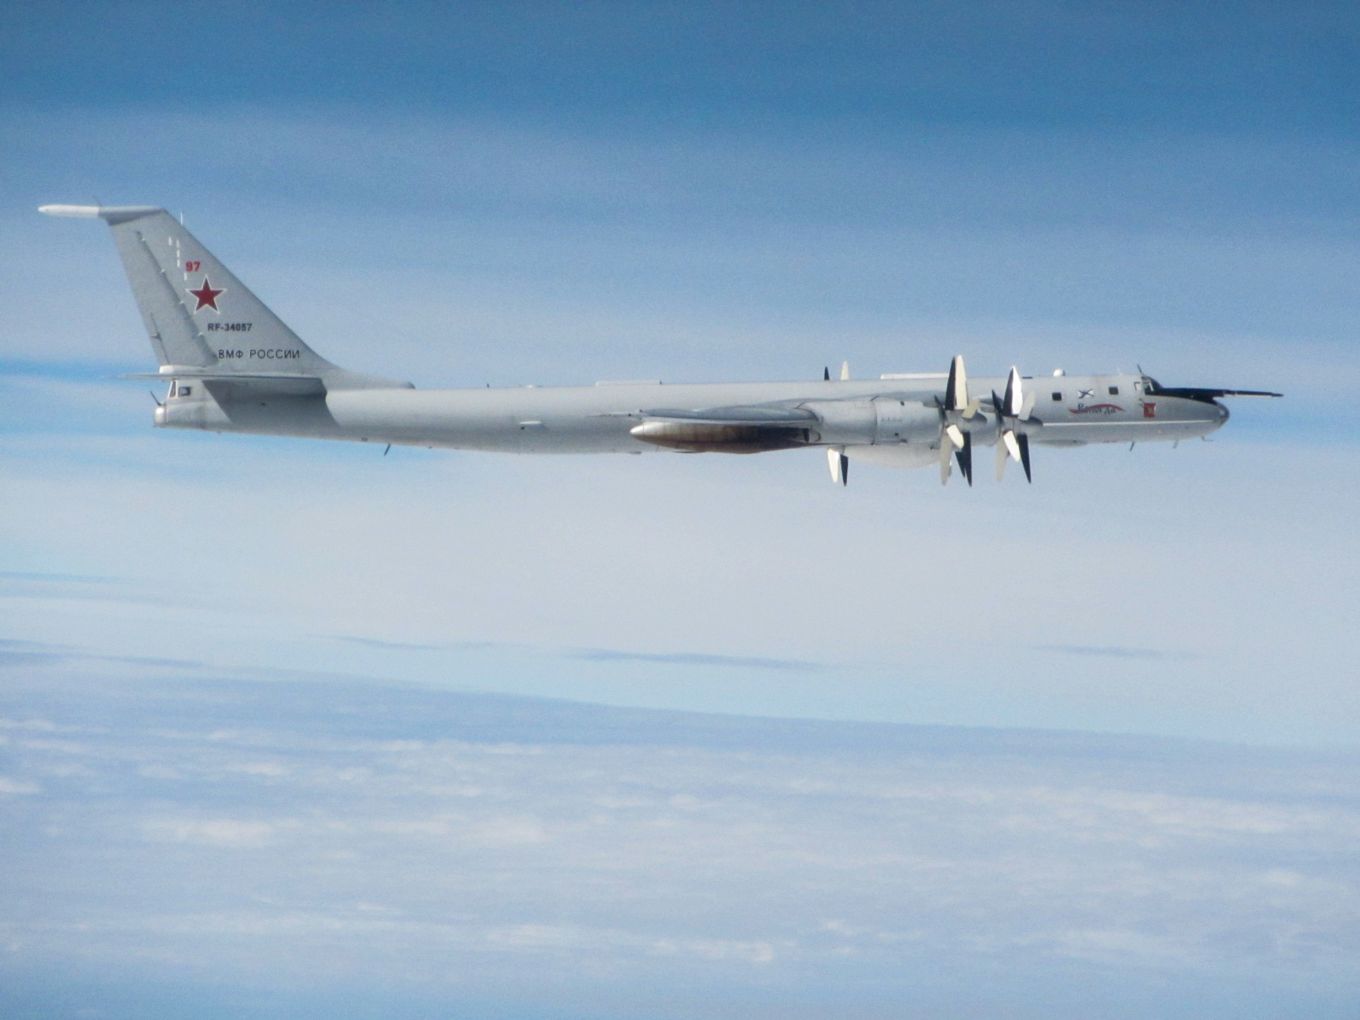 Image shows a Russian aircraft flying.